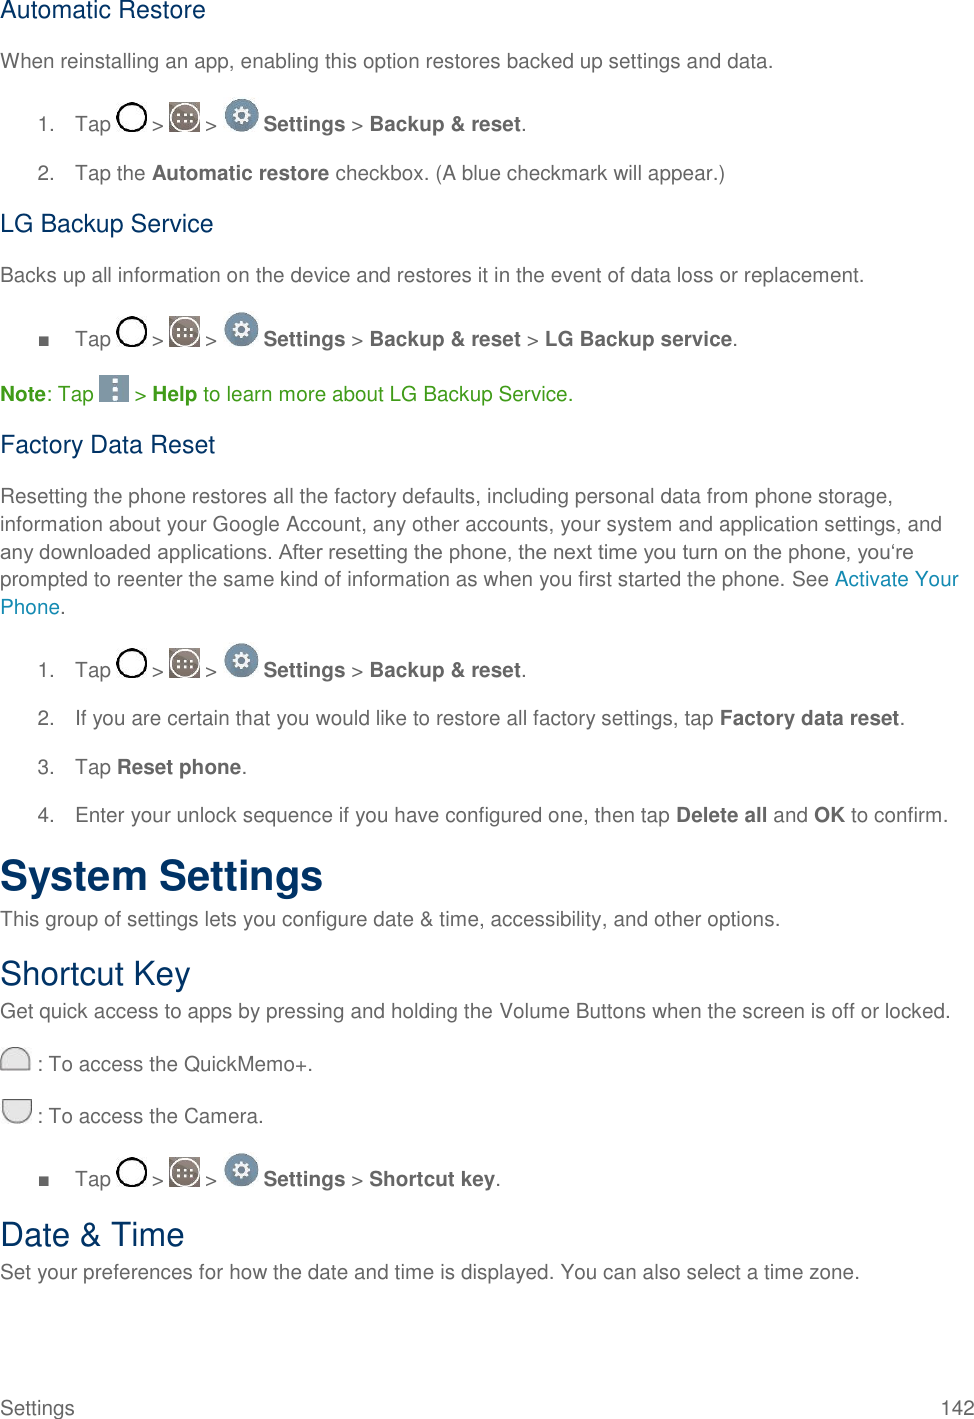 Settings  142 Automatic Restore When reinstalling an app, enabling this option restores backed up settings and data. 1.  Tap   &gt;   &gt;   Settings &gt; Backup &amp; reset. 2.  Tap the Automatic restore checkbox. (A blue checkmark will appear.) LG Backup Service Backs up all information on the device and restores it in the event of data loss or replacement.  ■  Tap   &gt;   &gt;   Settings &gt; Backup &amp; reset &gt; LG Backup service.  Note: Tap   &gt; Help to learn more about LG Backup Service. Factory Data Reset Resetting the phone restores all the factory defaults, including personal data from phone storage, information about your Google Account, any other accounts, your system and application settings, and any downloaded applications. After resetting the phone, the next time you turn on the phone, you‗re prompted to reenter the same kind of information as when you first started the phone. See Activate Your Phone. 1.  Tap   &gt;   &gt;   Settings &gt; Backup &amp; reset. 2.  If you are certain that you would like to restore all factory settings, tap Factory data reset. 3.  Tap Reset phone. 4.  Enter your unlock sequence if you have configured one, then tap Delete all and OK to confirm. System Settings This group of settings lets you configure date &amp; time, accessibility, and other options. Shortcut Key Get quick access to apps by pressing and holding the Volume Buttons when the screen is off or locked.  : To access the QuickMemo+.  : To access the Camera. ■  Tap   &gt;   &gt;   Settings &gt; Shortcut key. Date &amp; Time Set your preferences for how the date and time is displayed. You can also select a time zone. 